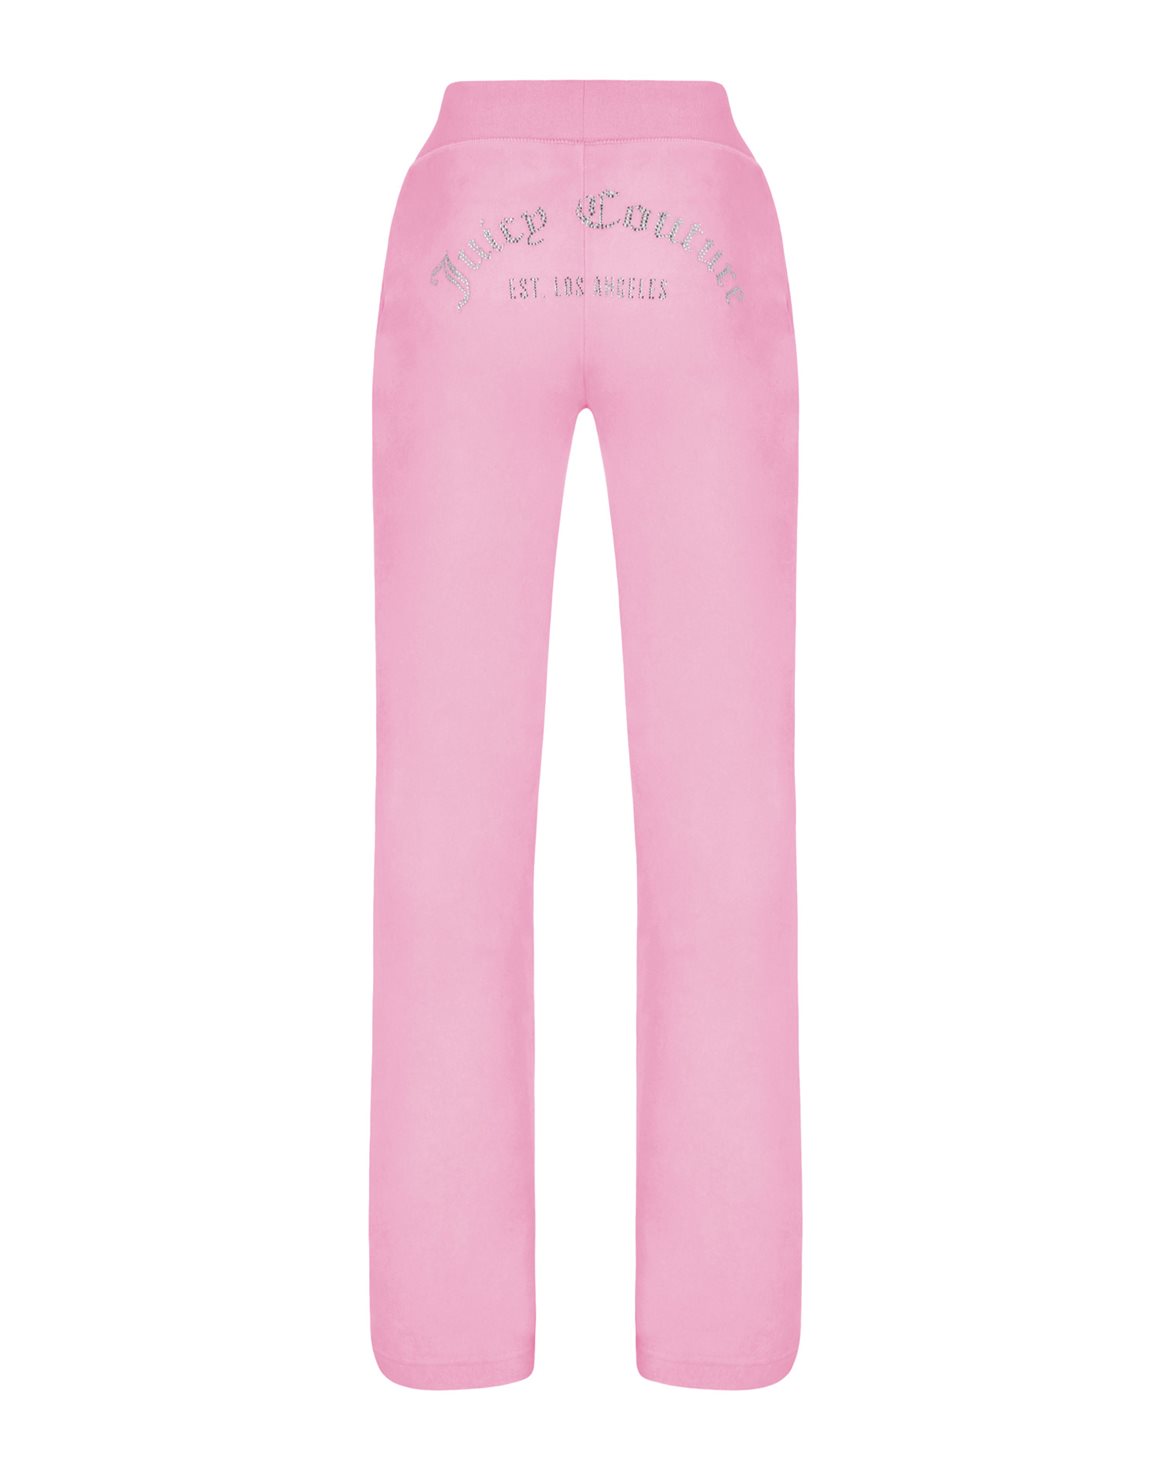 Juicy Couture Black Label Terry Flare Pants - 100% Exclusive |  Bloomingdale's